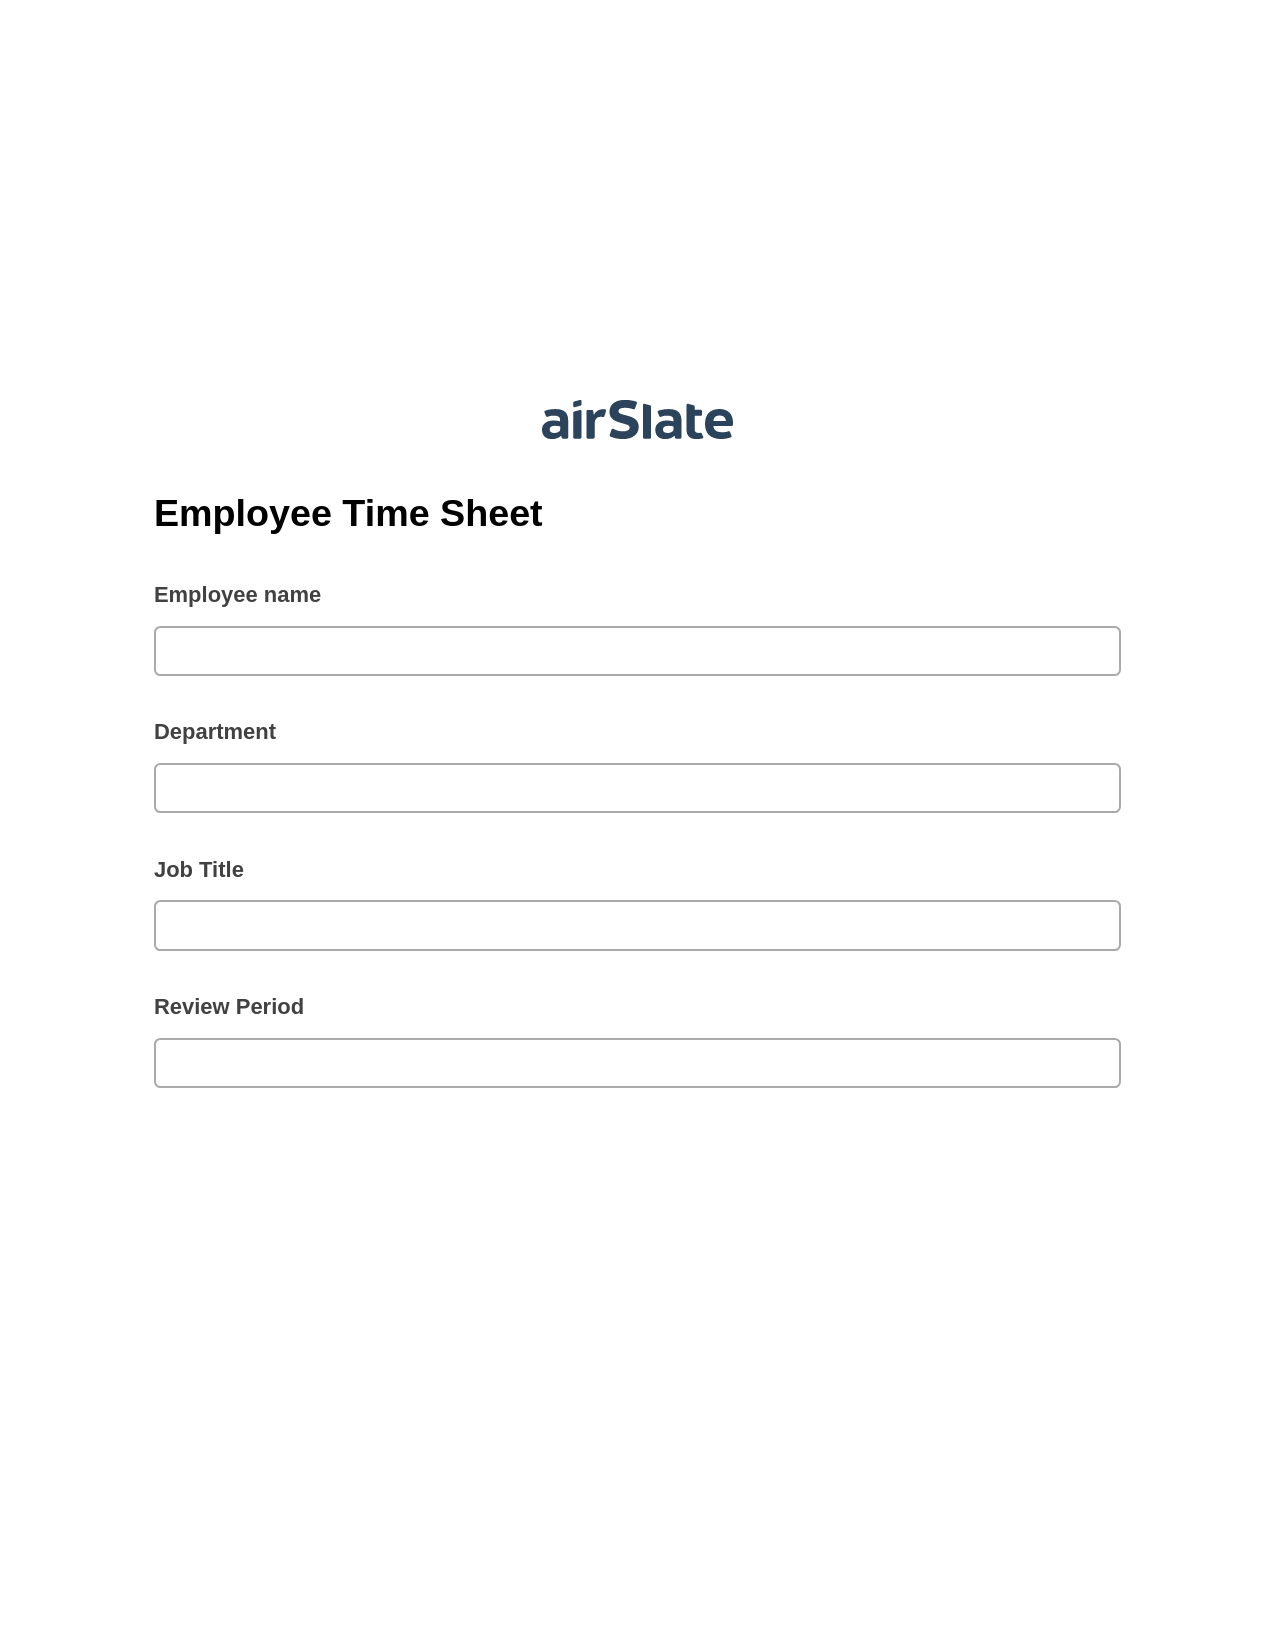 Employee Time Sheet Pre-fill from Excel Spreadsheet Bot, Update Audit Trail Bot, Export to MySQL Bot